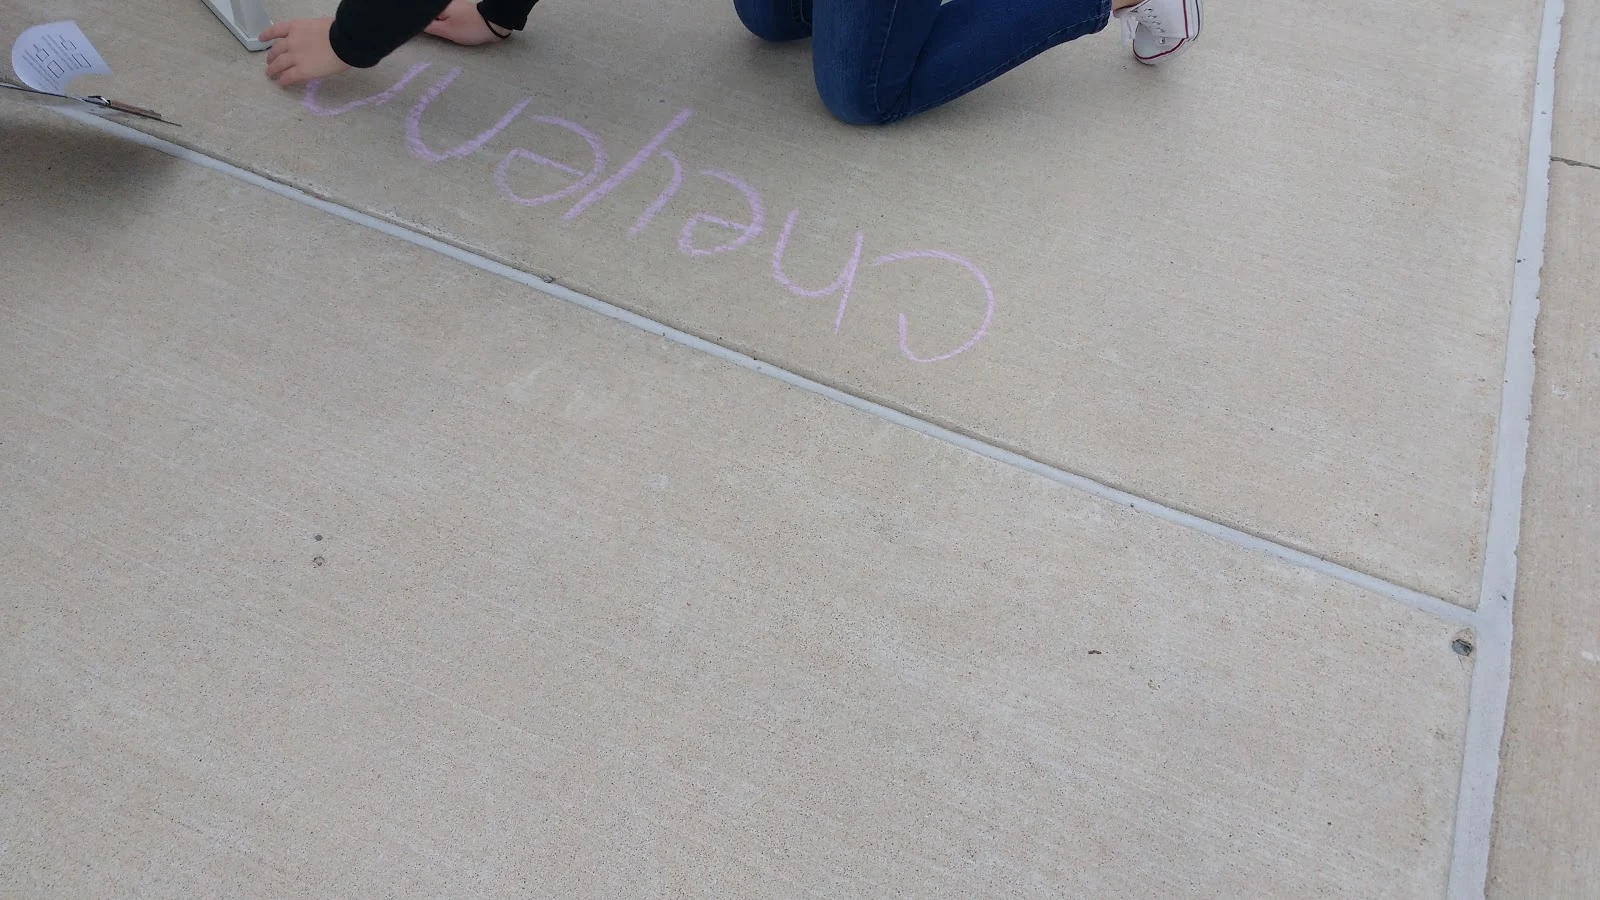 chalk messages measurement lab in physical science